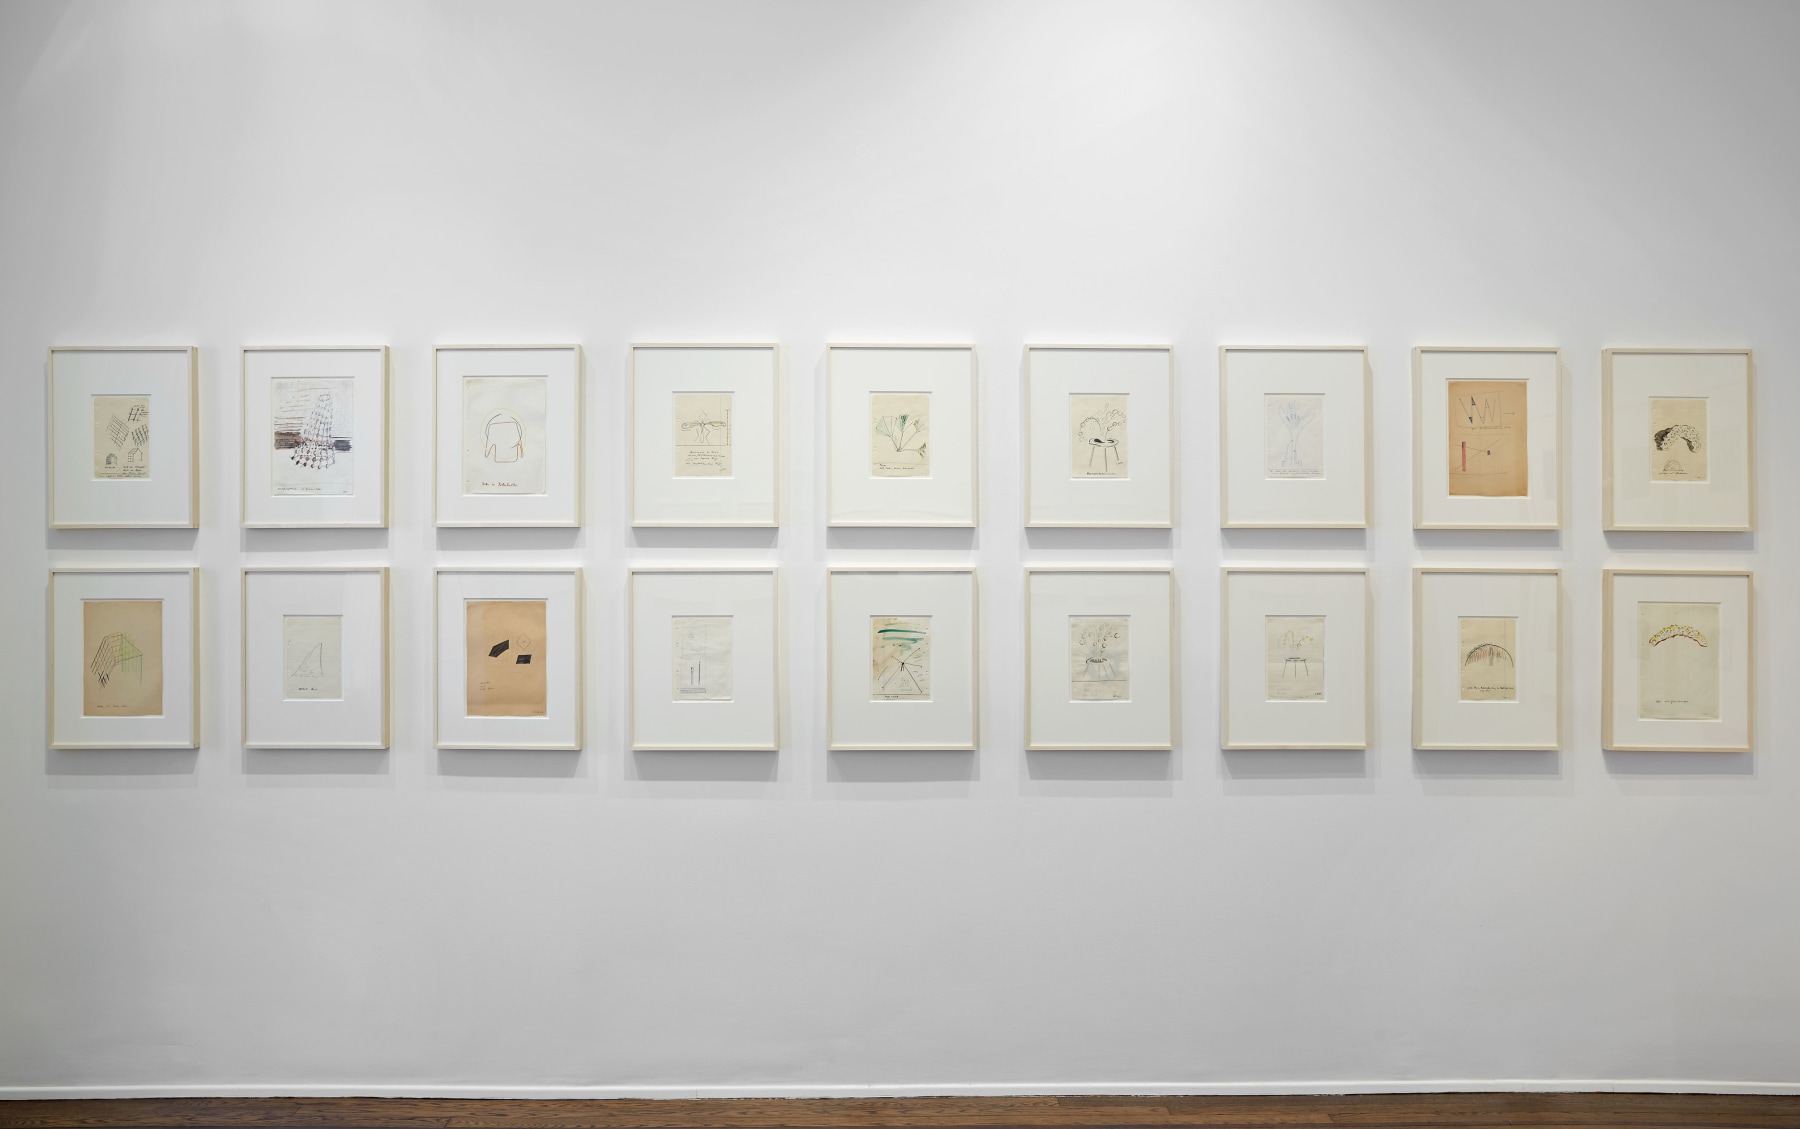 Sigmar Polke, Early Works on Paper, New York, 2014, Installation Image 13